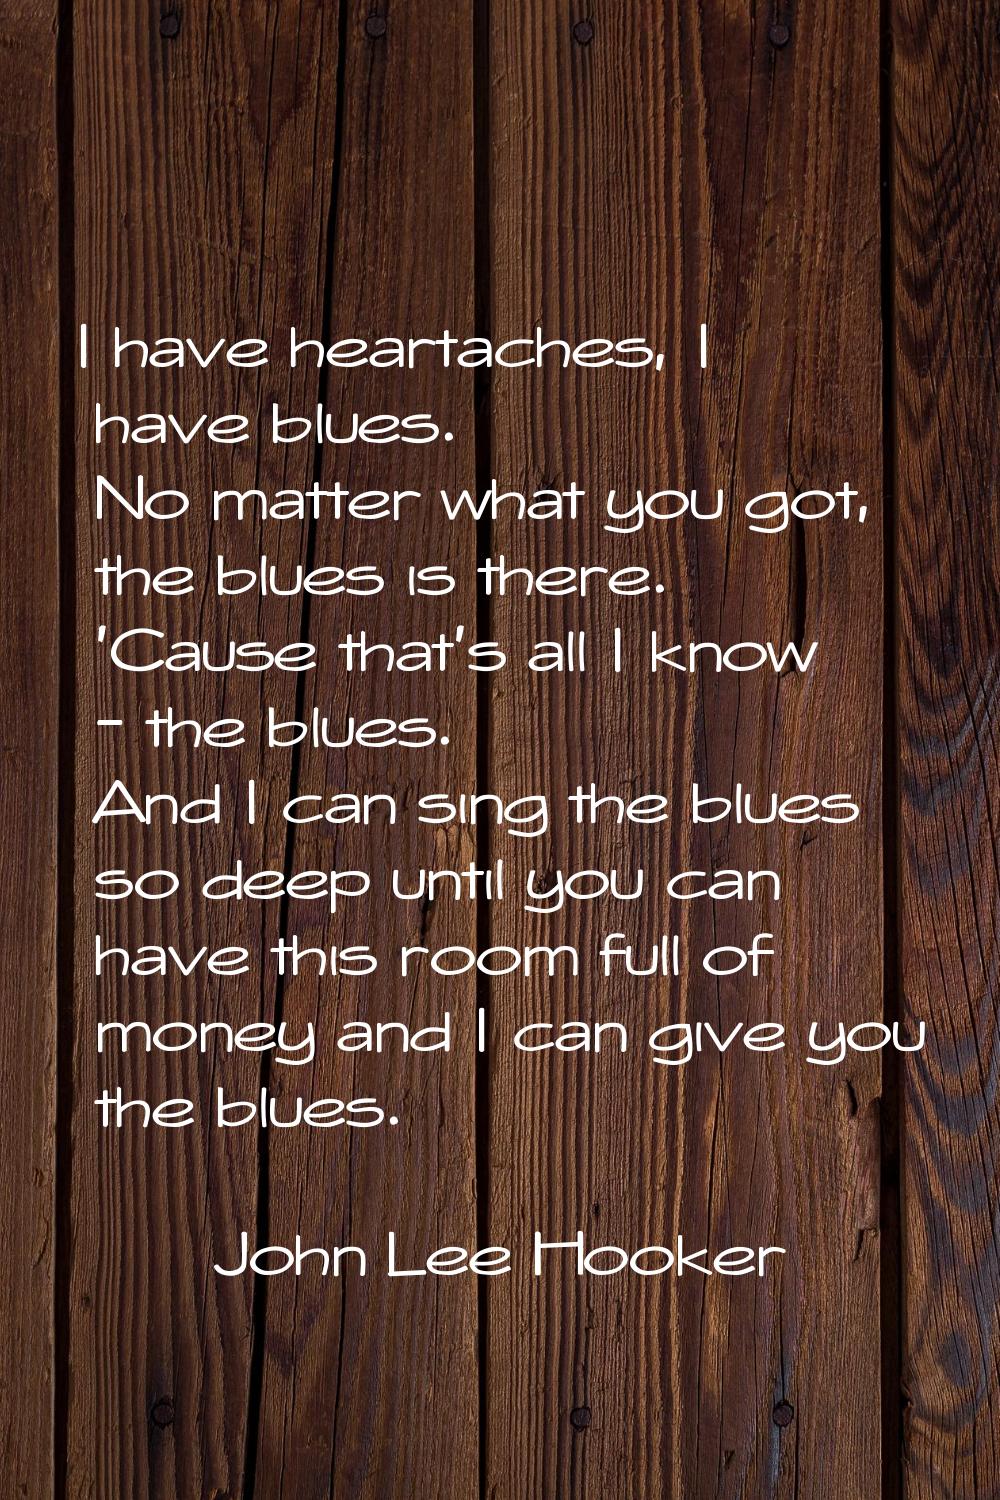 I have heartaches, I have blues. No matter what you got, the blues is there. 'Cause that's all I kn